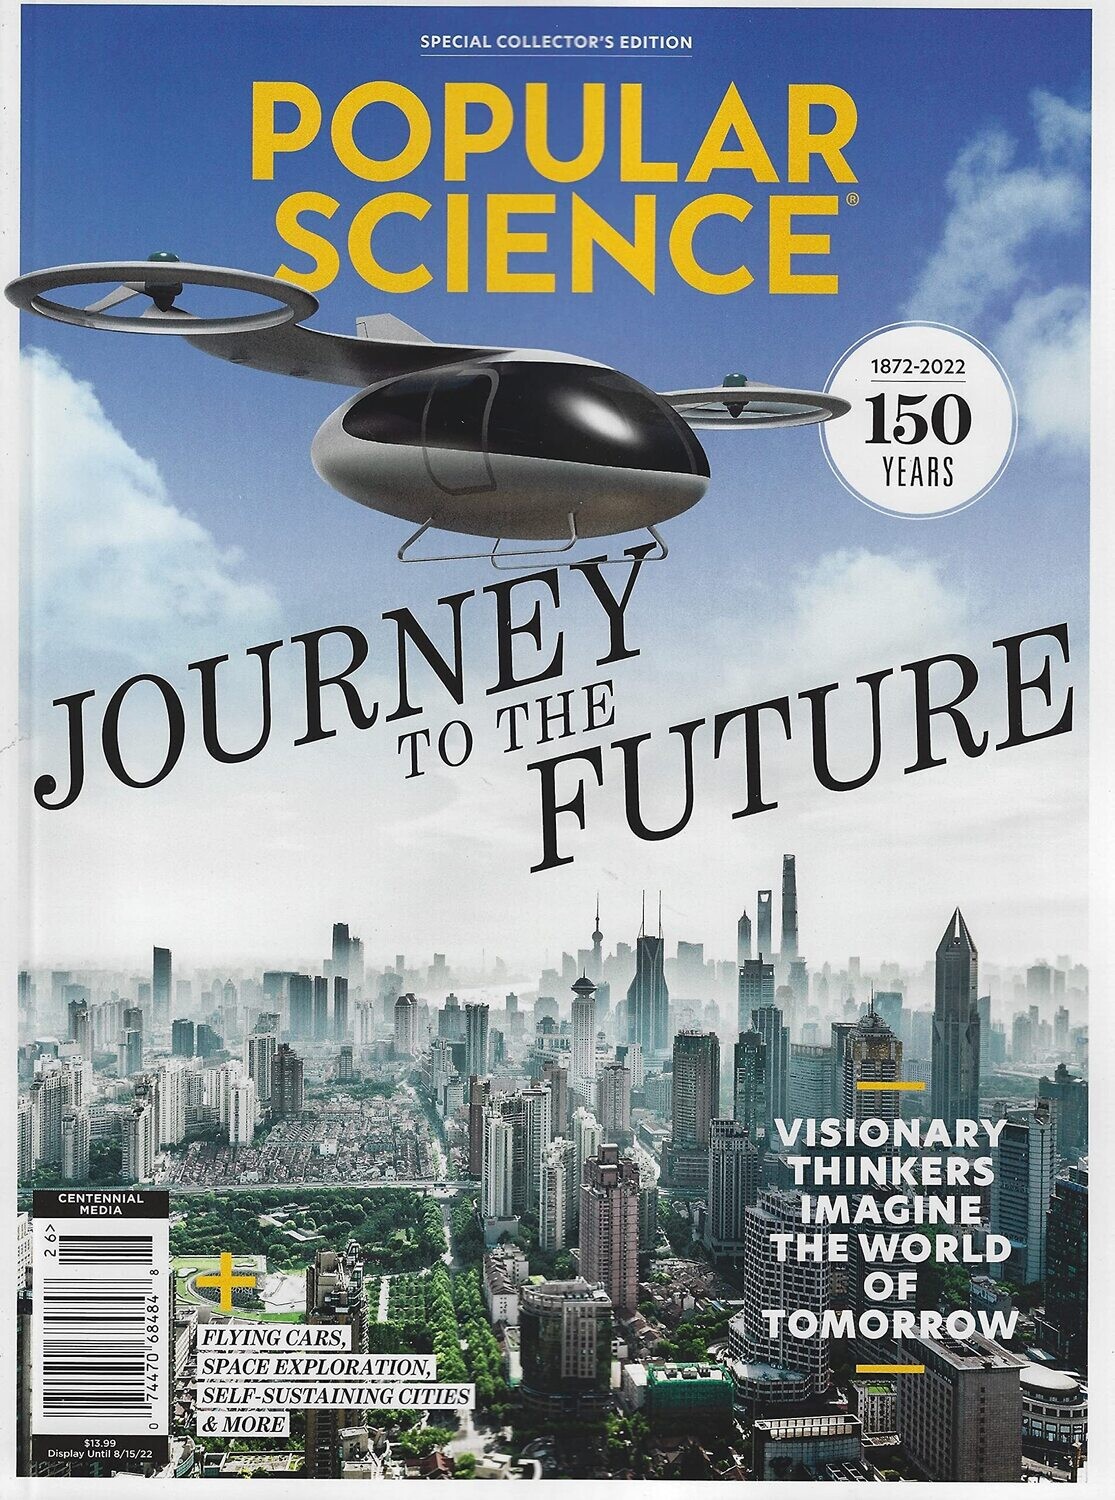 Journey to the Future-Popular Science Special Collector's Edition-2022